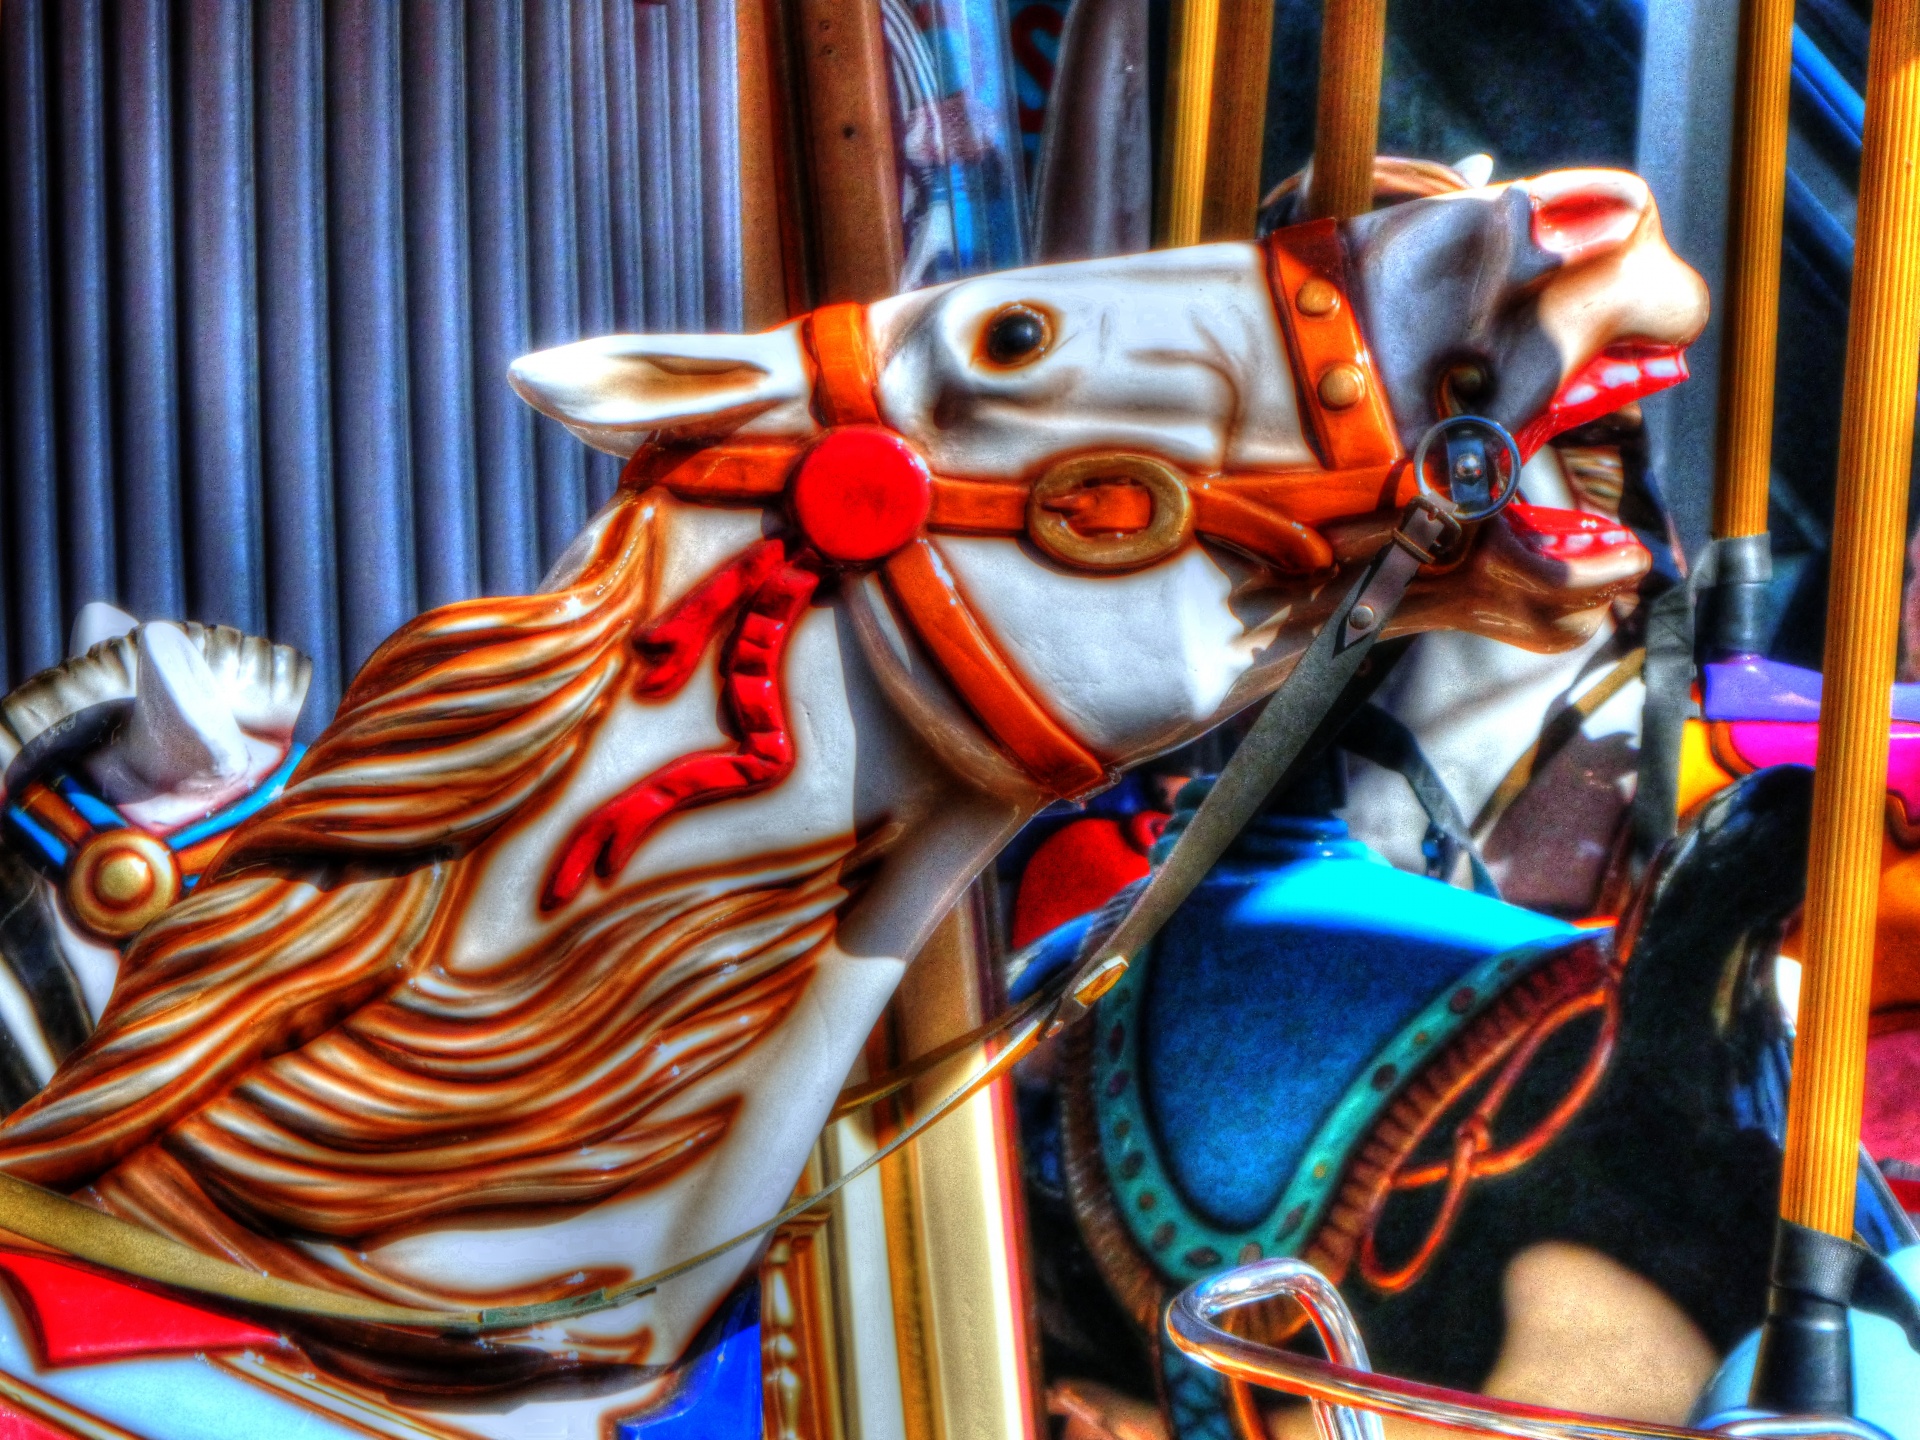 merry-go-round horse carnival free photo